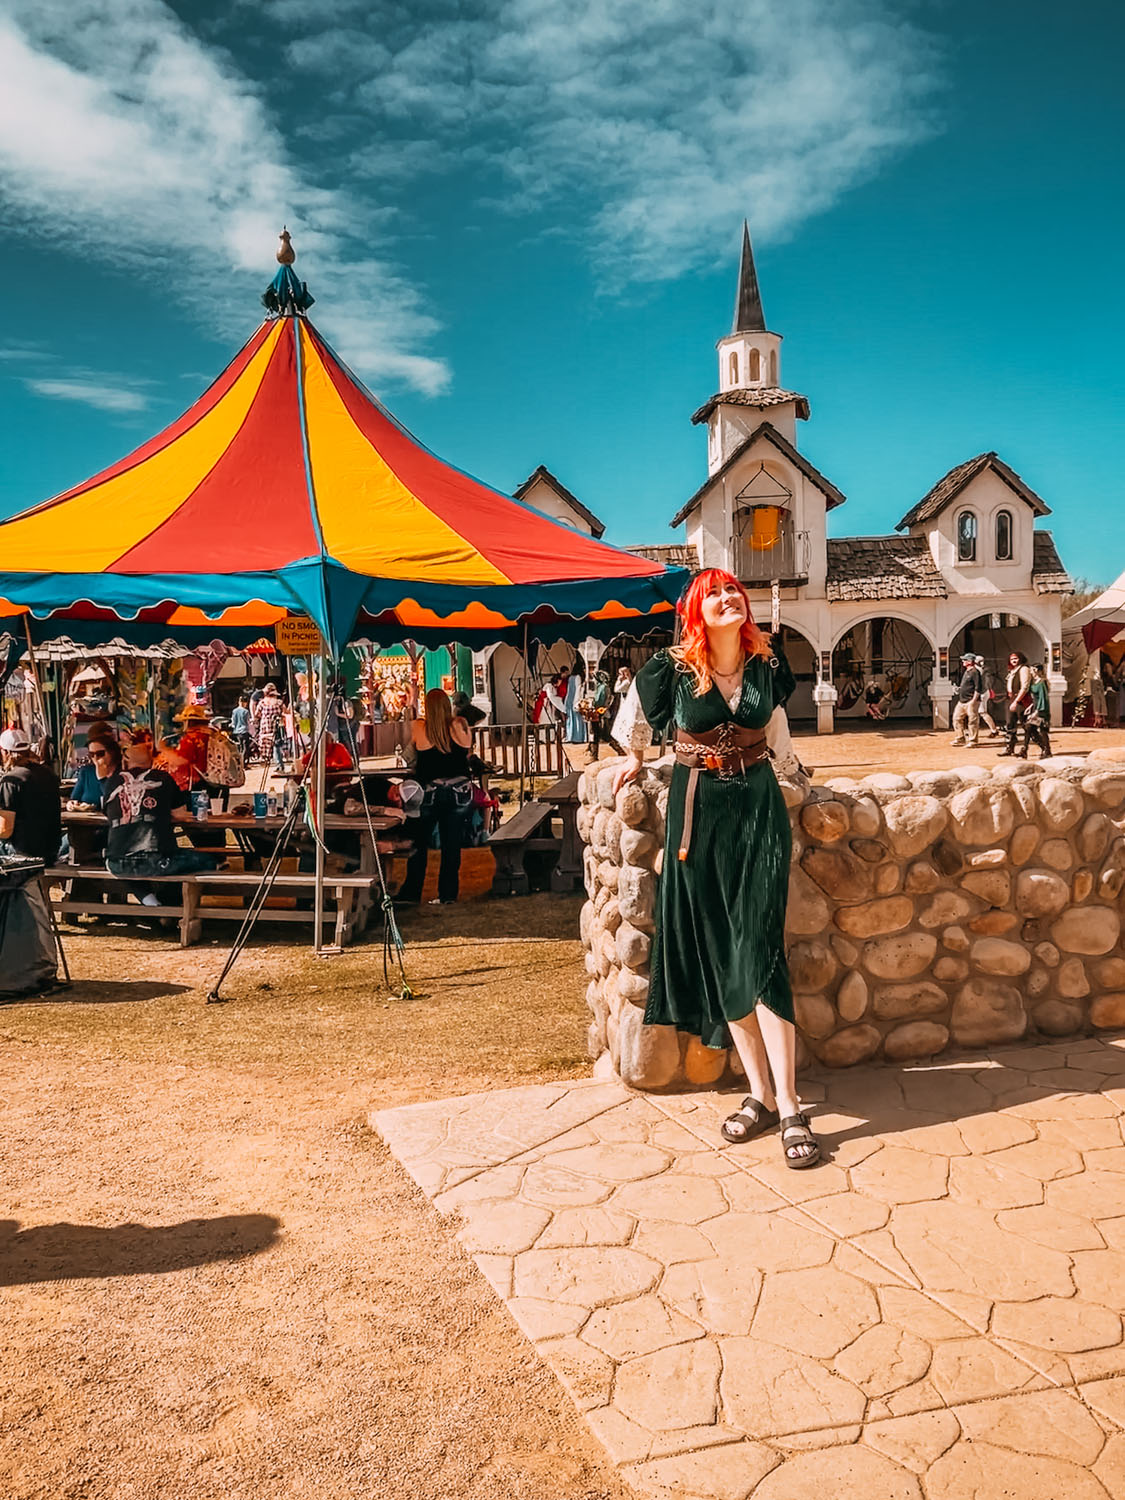 10 Best Things to See and Do at the Arizona Renaissance Festival 2023